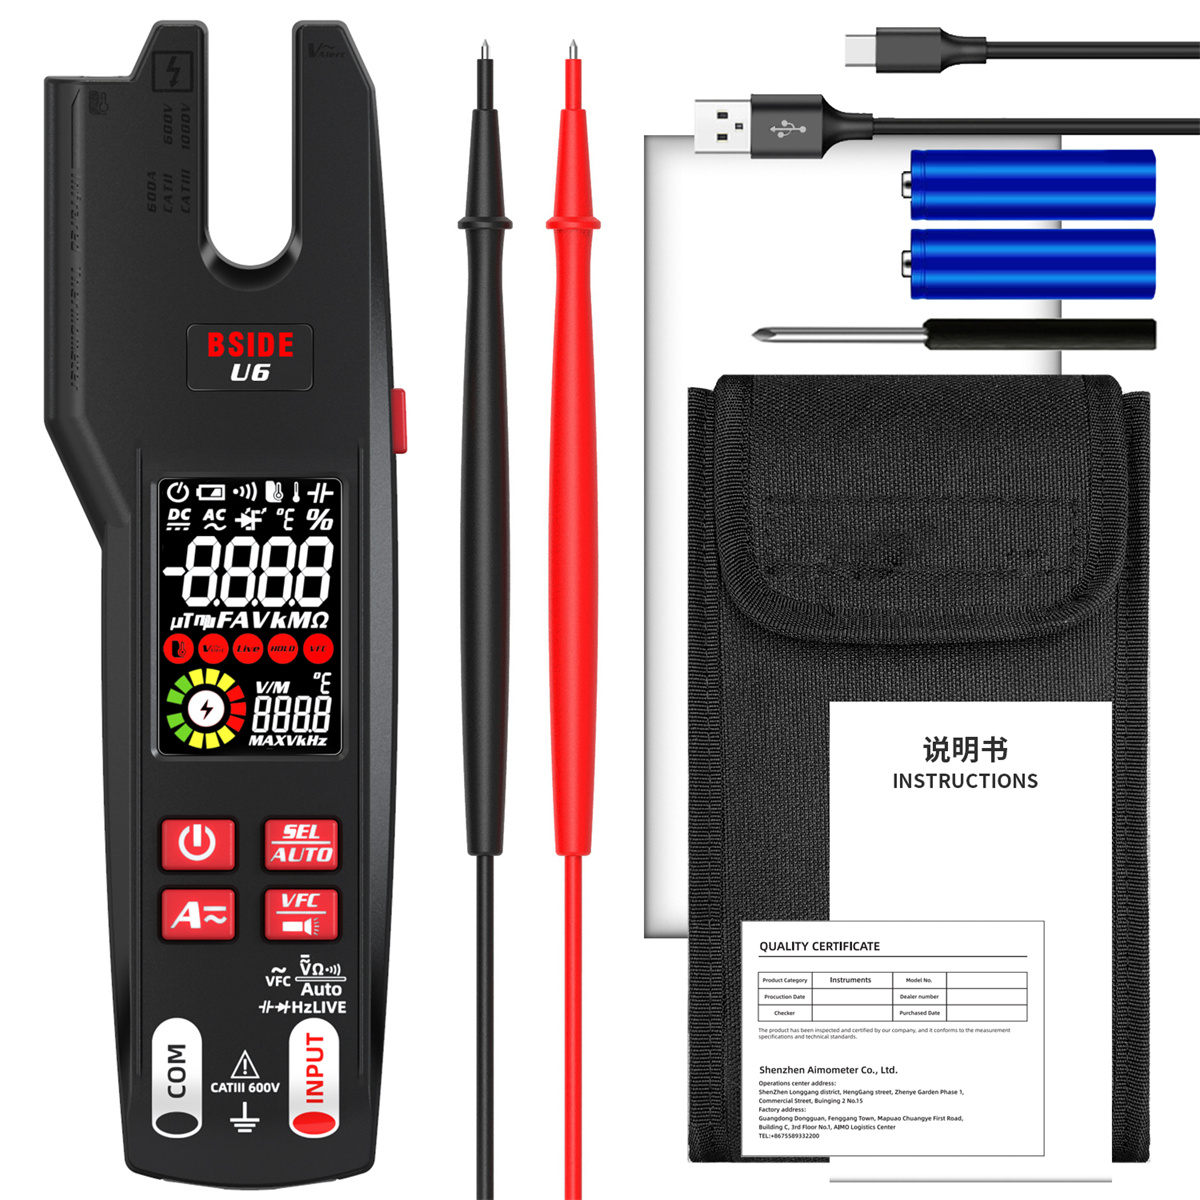 BSIDE U6 Digital Clamp Fork Multimeter AC/DC Voltage Current Tester with Infrared Temperature Measurement & Safety Features